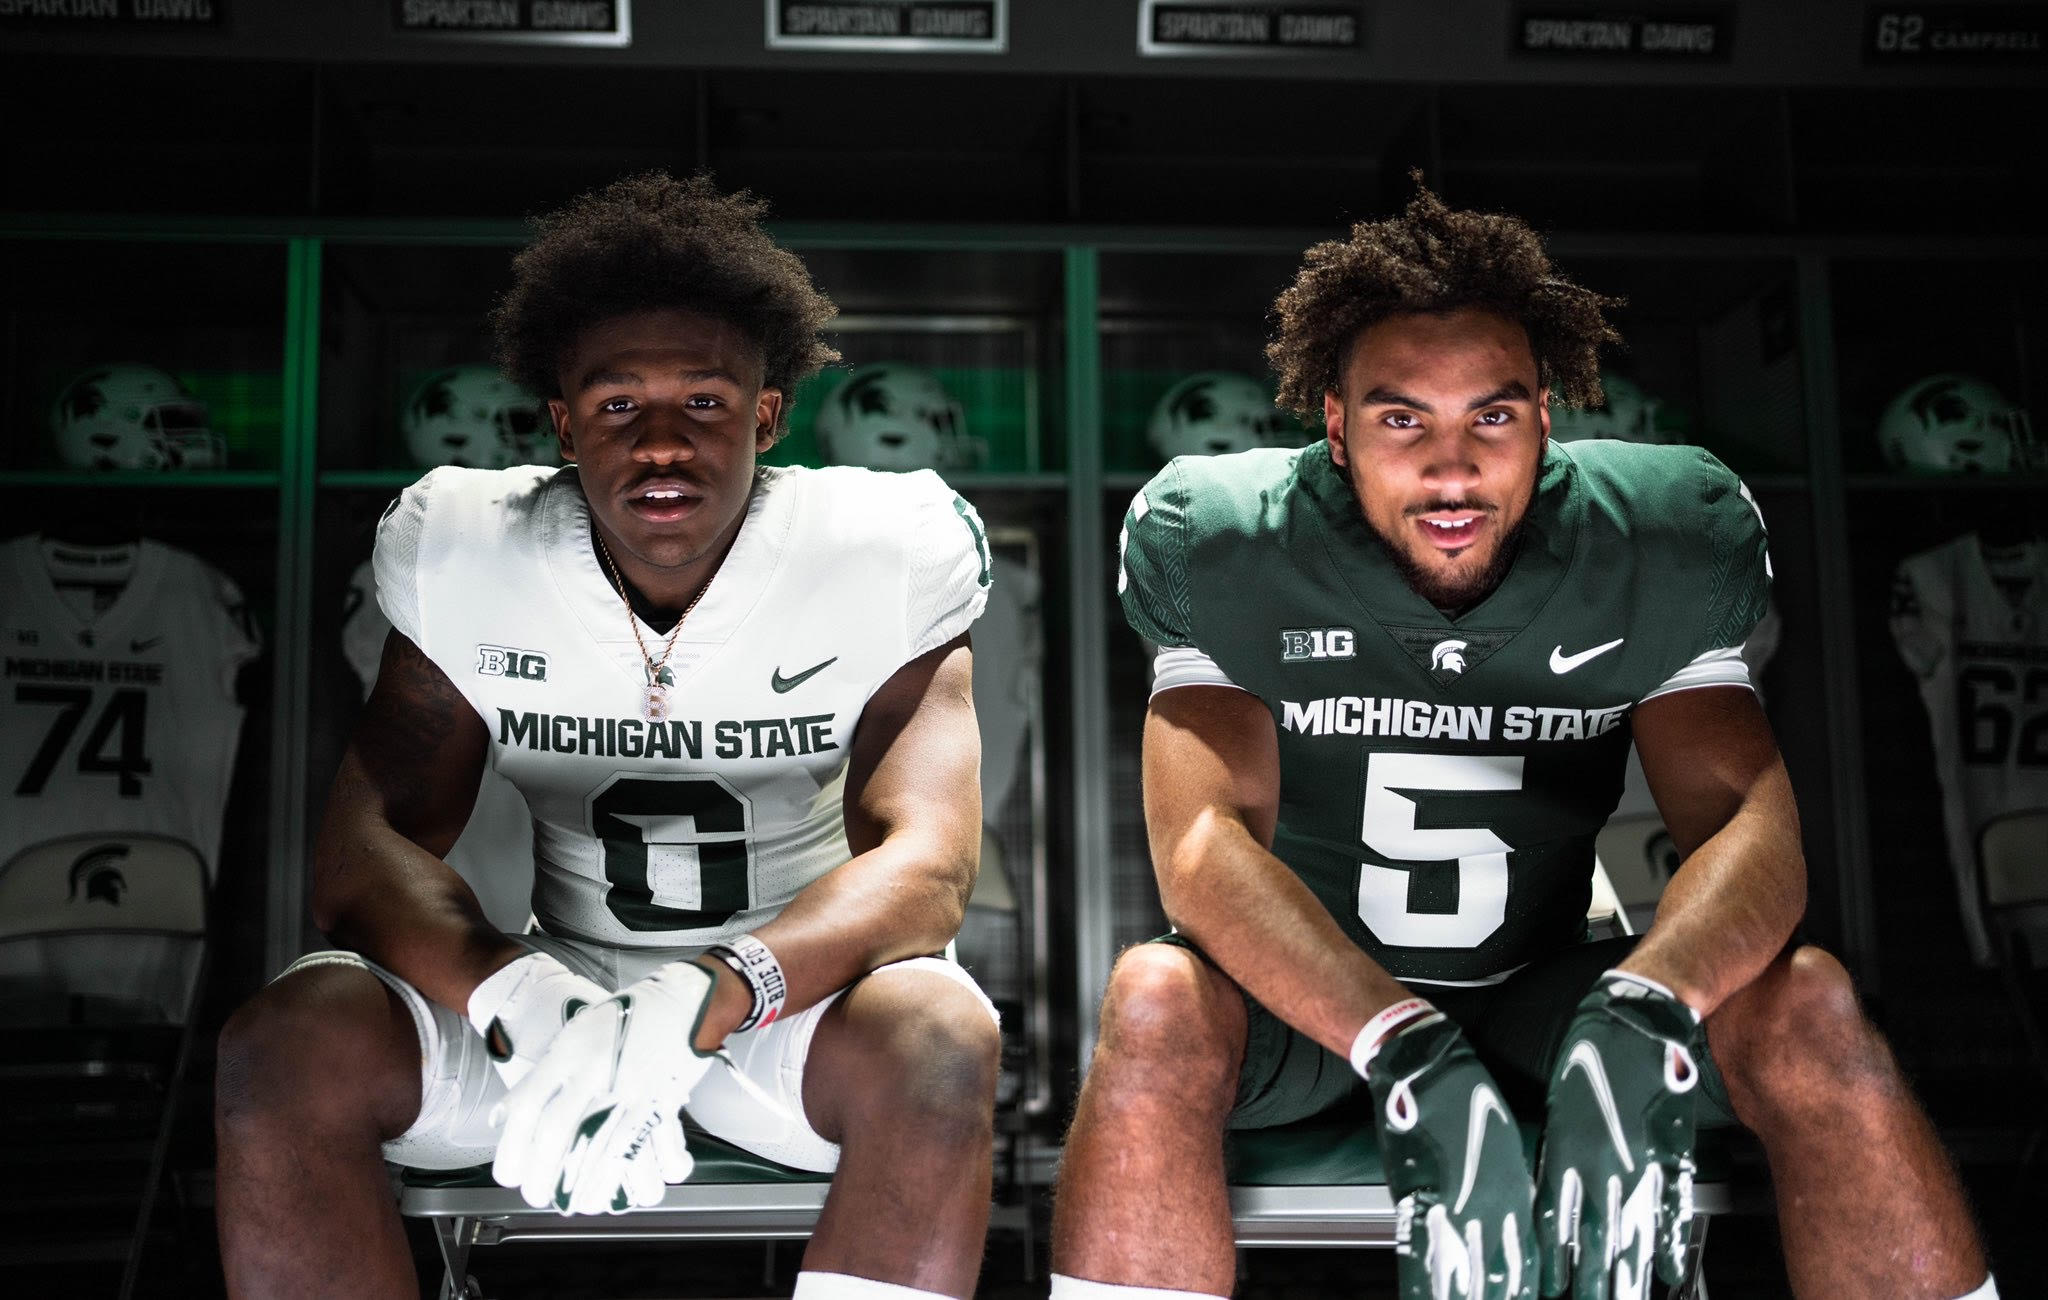 Michigan State Football: 5 players who will blow up in 2022